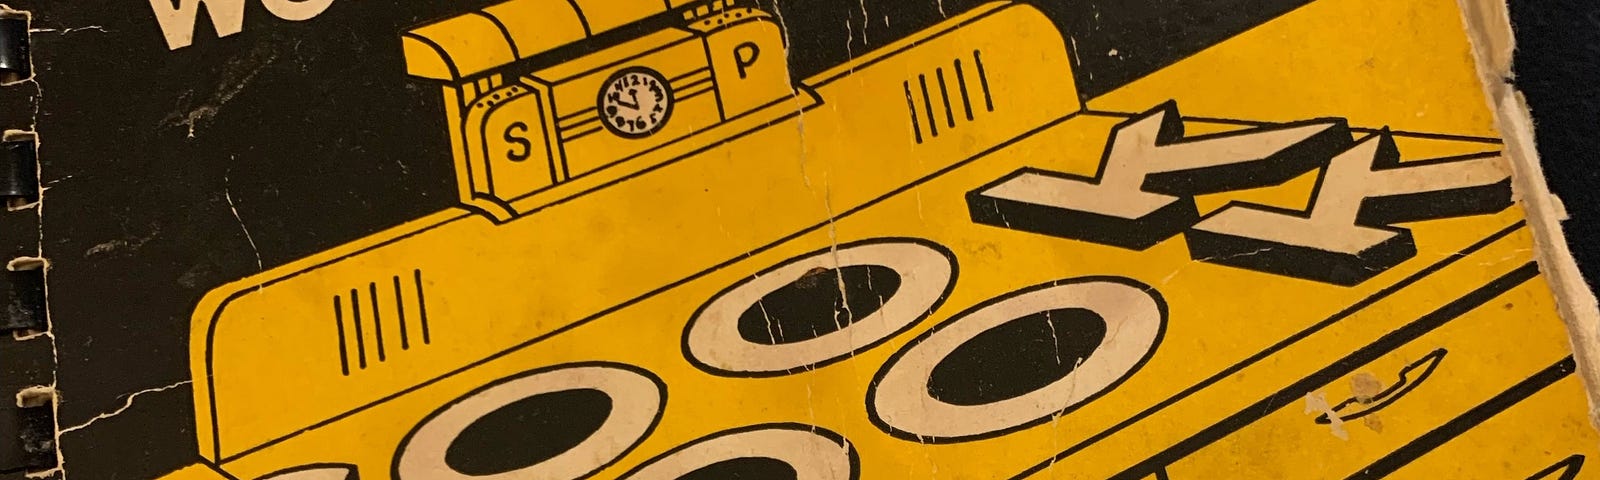 A well worn cover from the mid century community cookbook the recipe is taken from. It is a simple drawing of an oven, in yellow, black and white. It uses the round elements on top as the “O”s in the words “cook” and “book”.